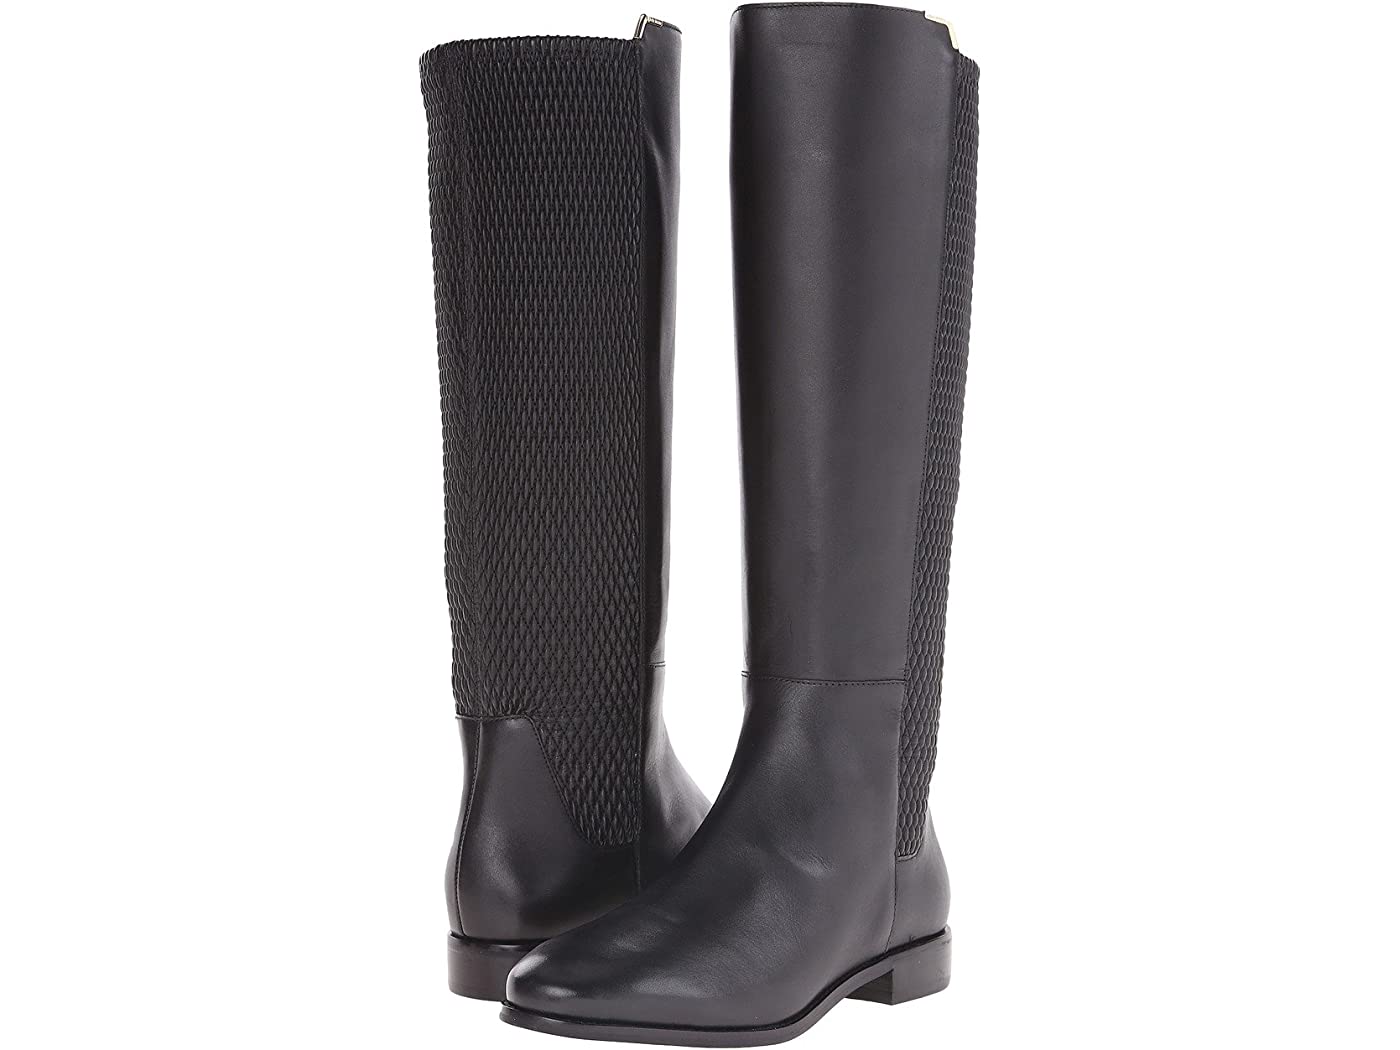 Cole Haan Rockland black leather riding boots